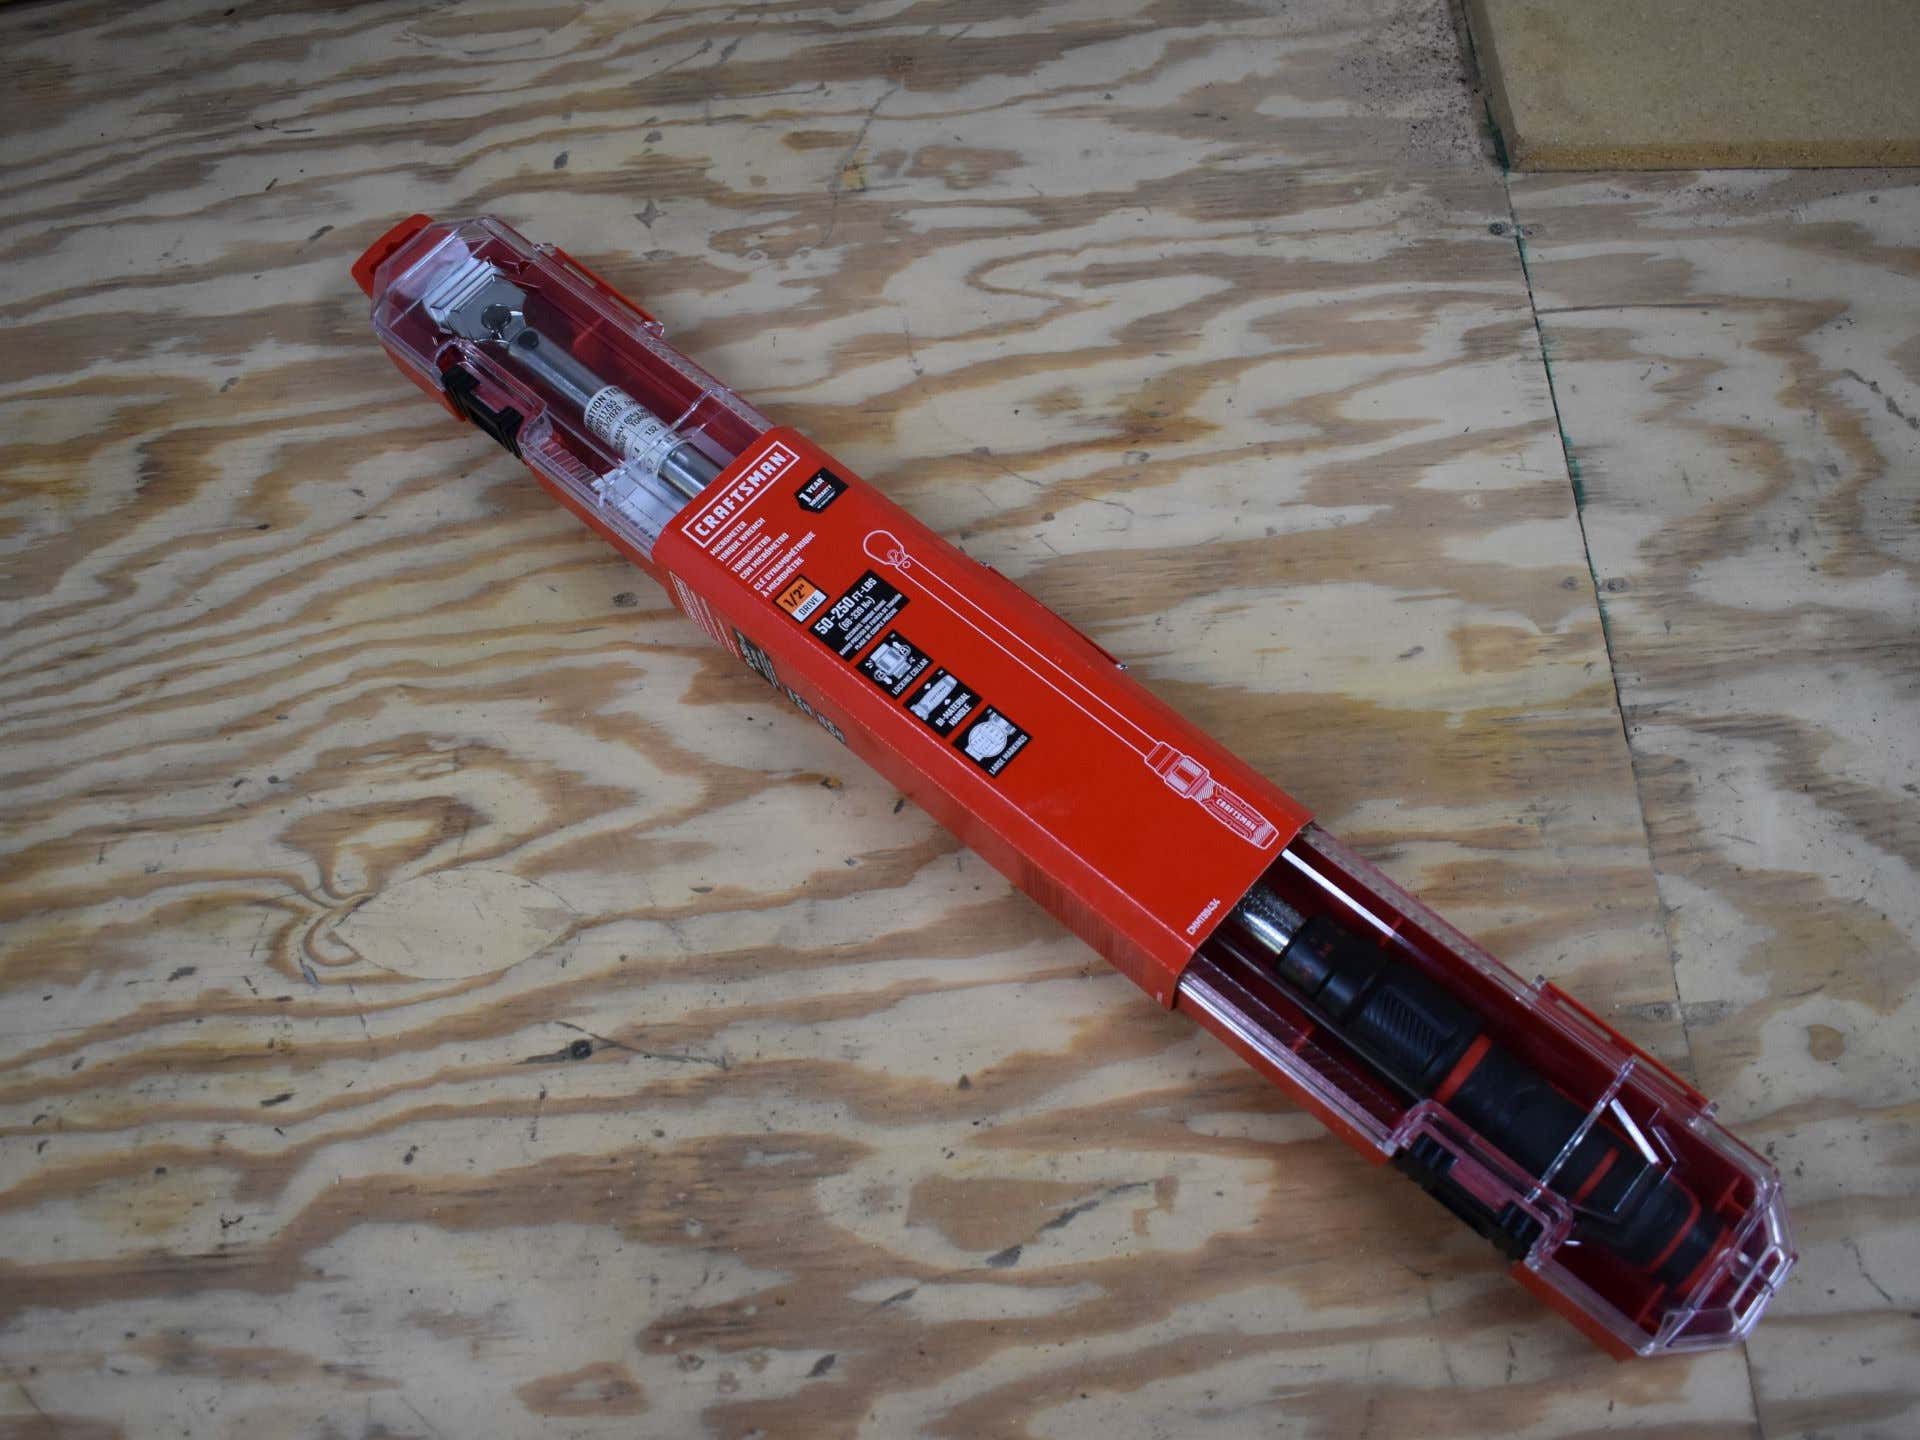 A Craftsman 1/2-inch SAE torque wrench.